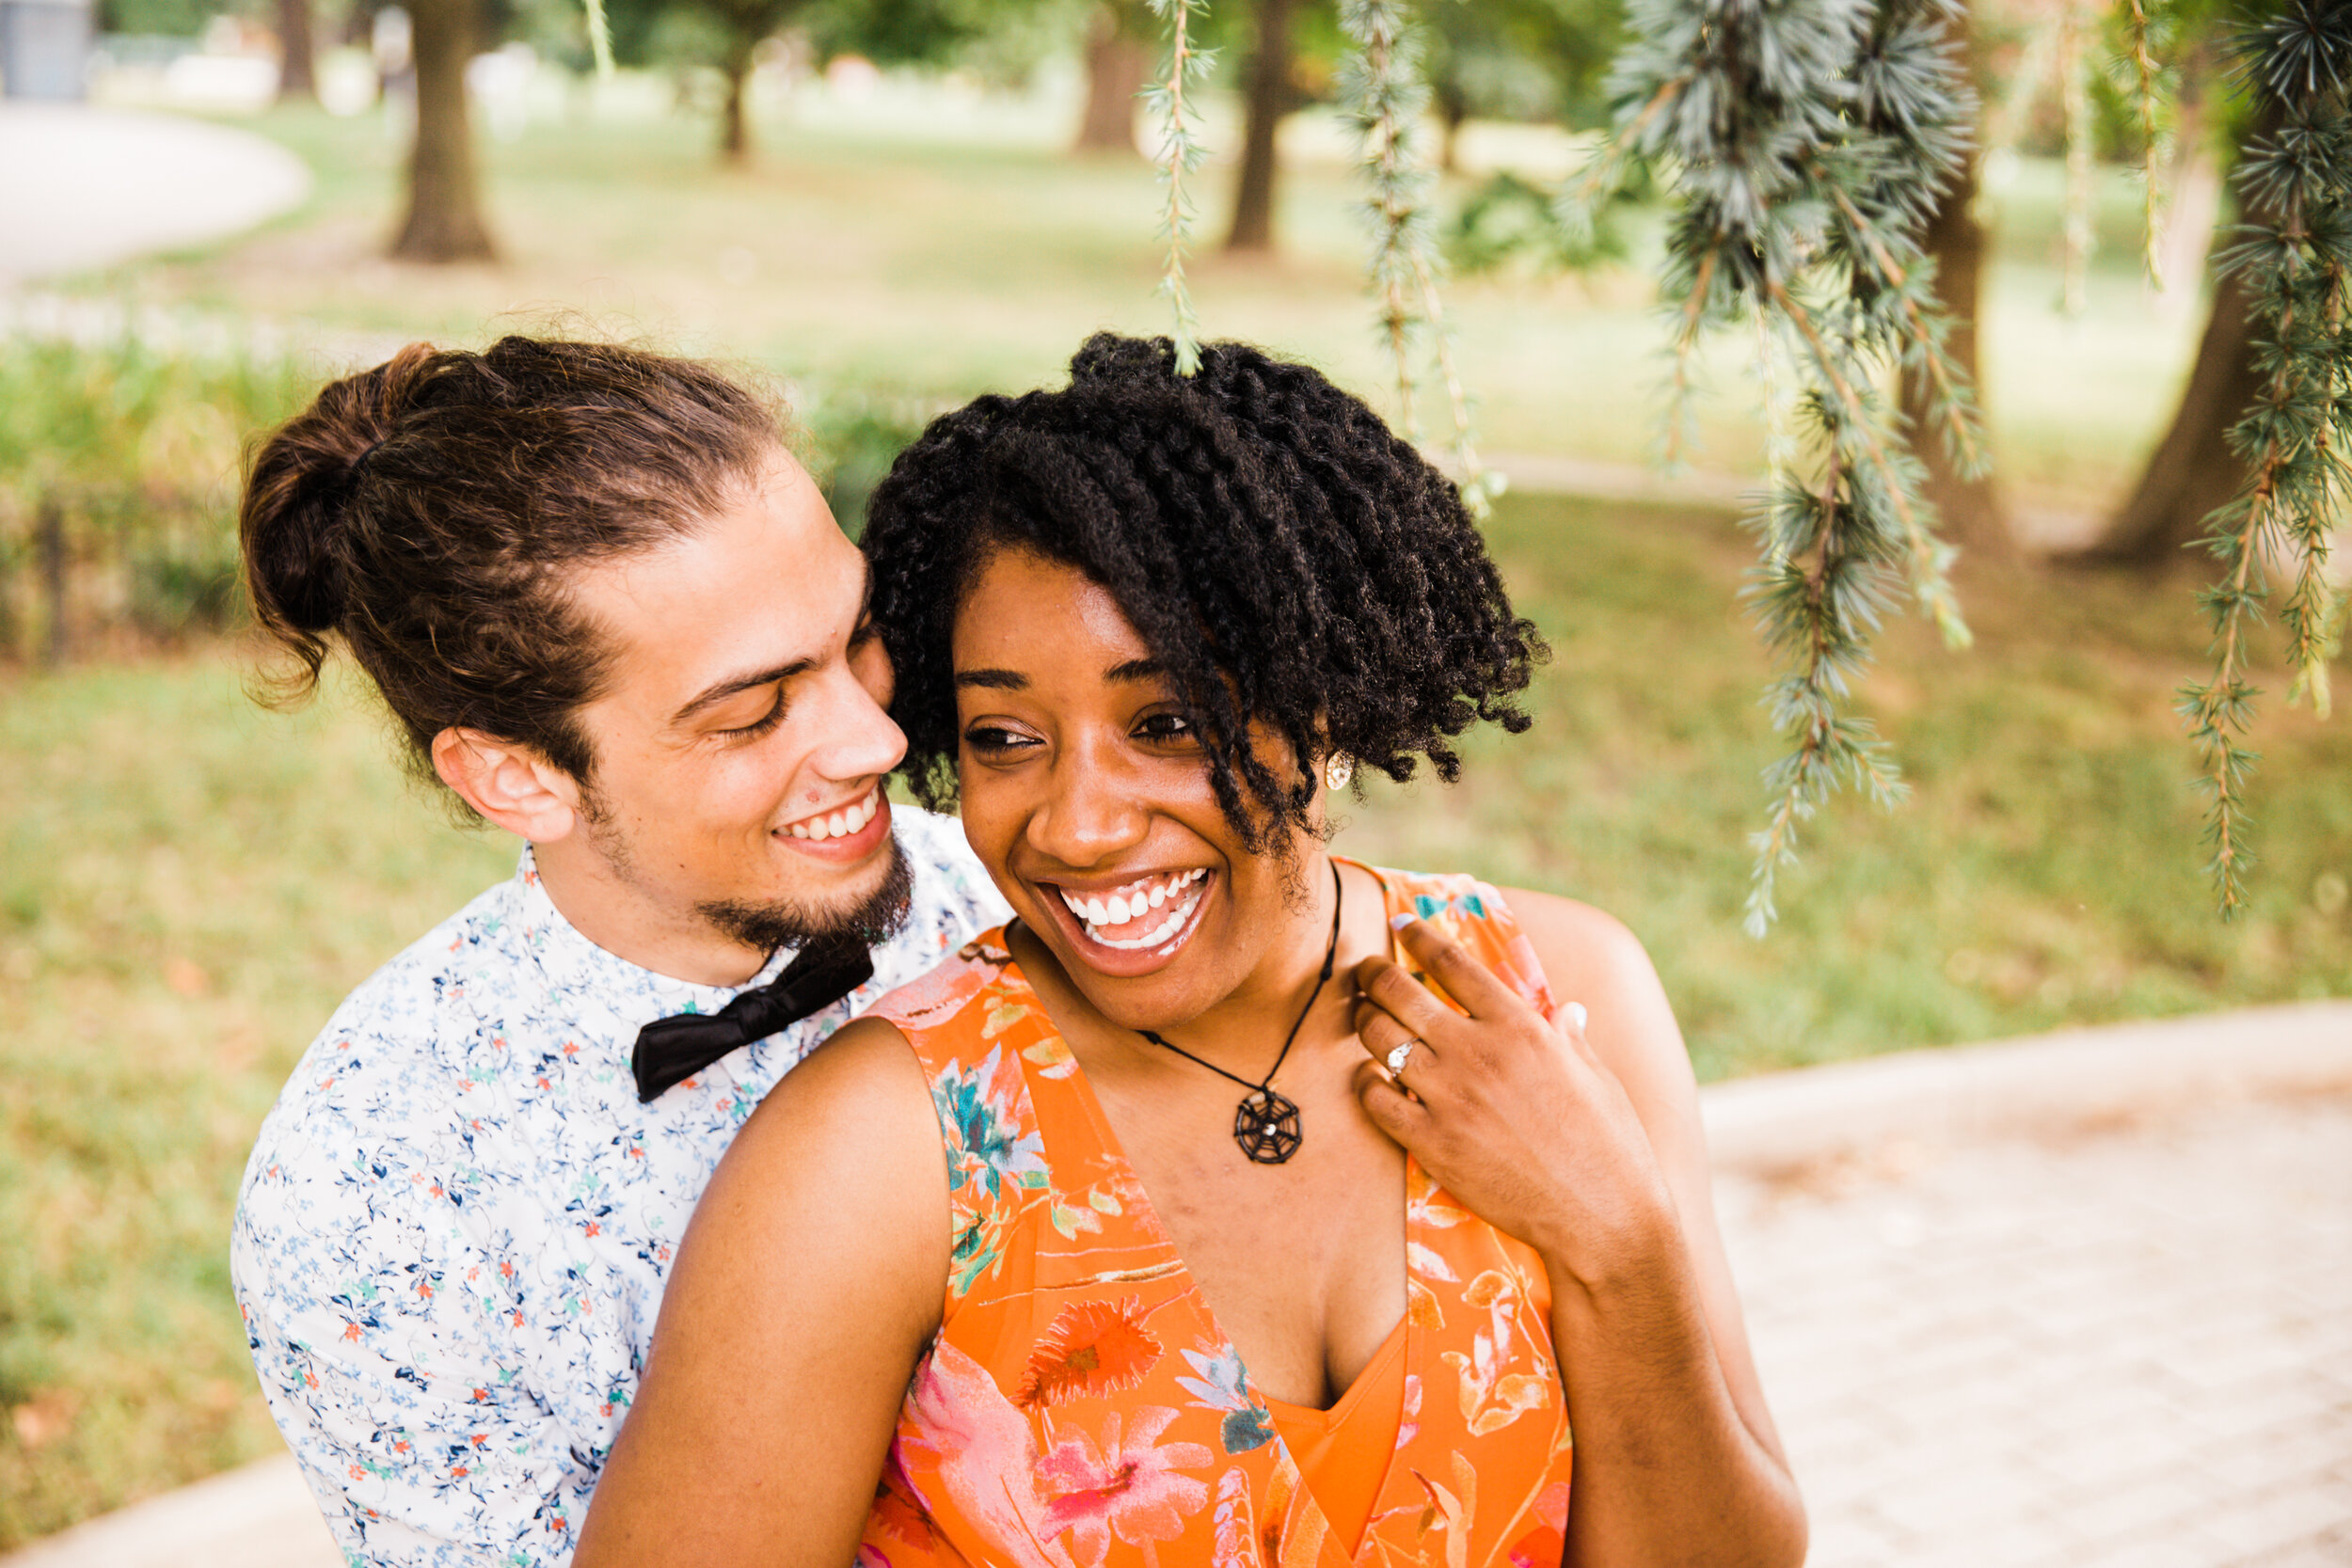 Golden Hour Engagement Session in Baltimore Maryland Patterson Park Pagoda DC Wedding Photographers Megapixels Media Photography and Videography Mixed Couple Multiracial Bride and Groom-13.jpg